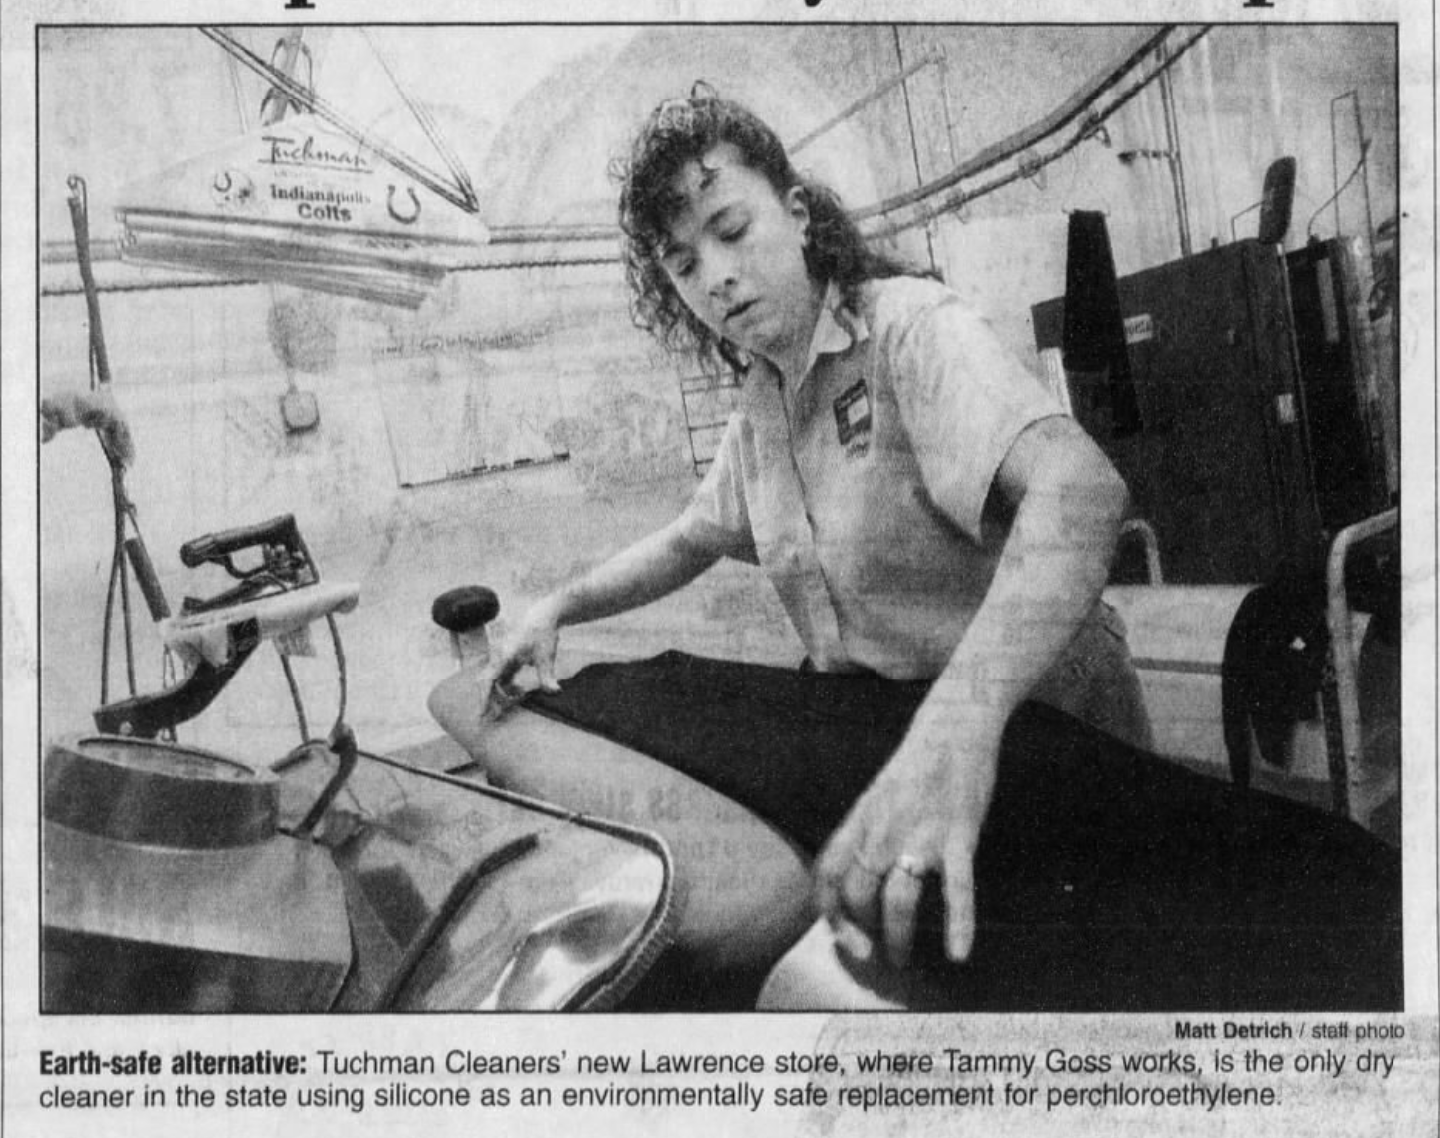 A newspaper clipping shows a woman pressing pants.